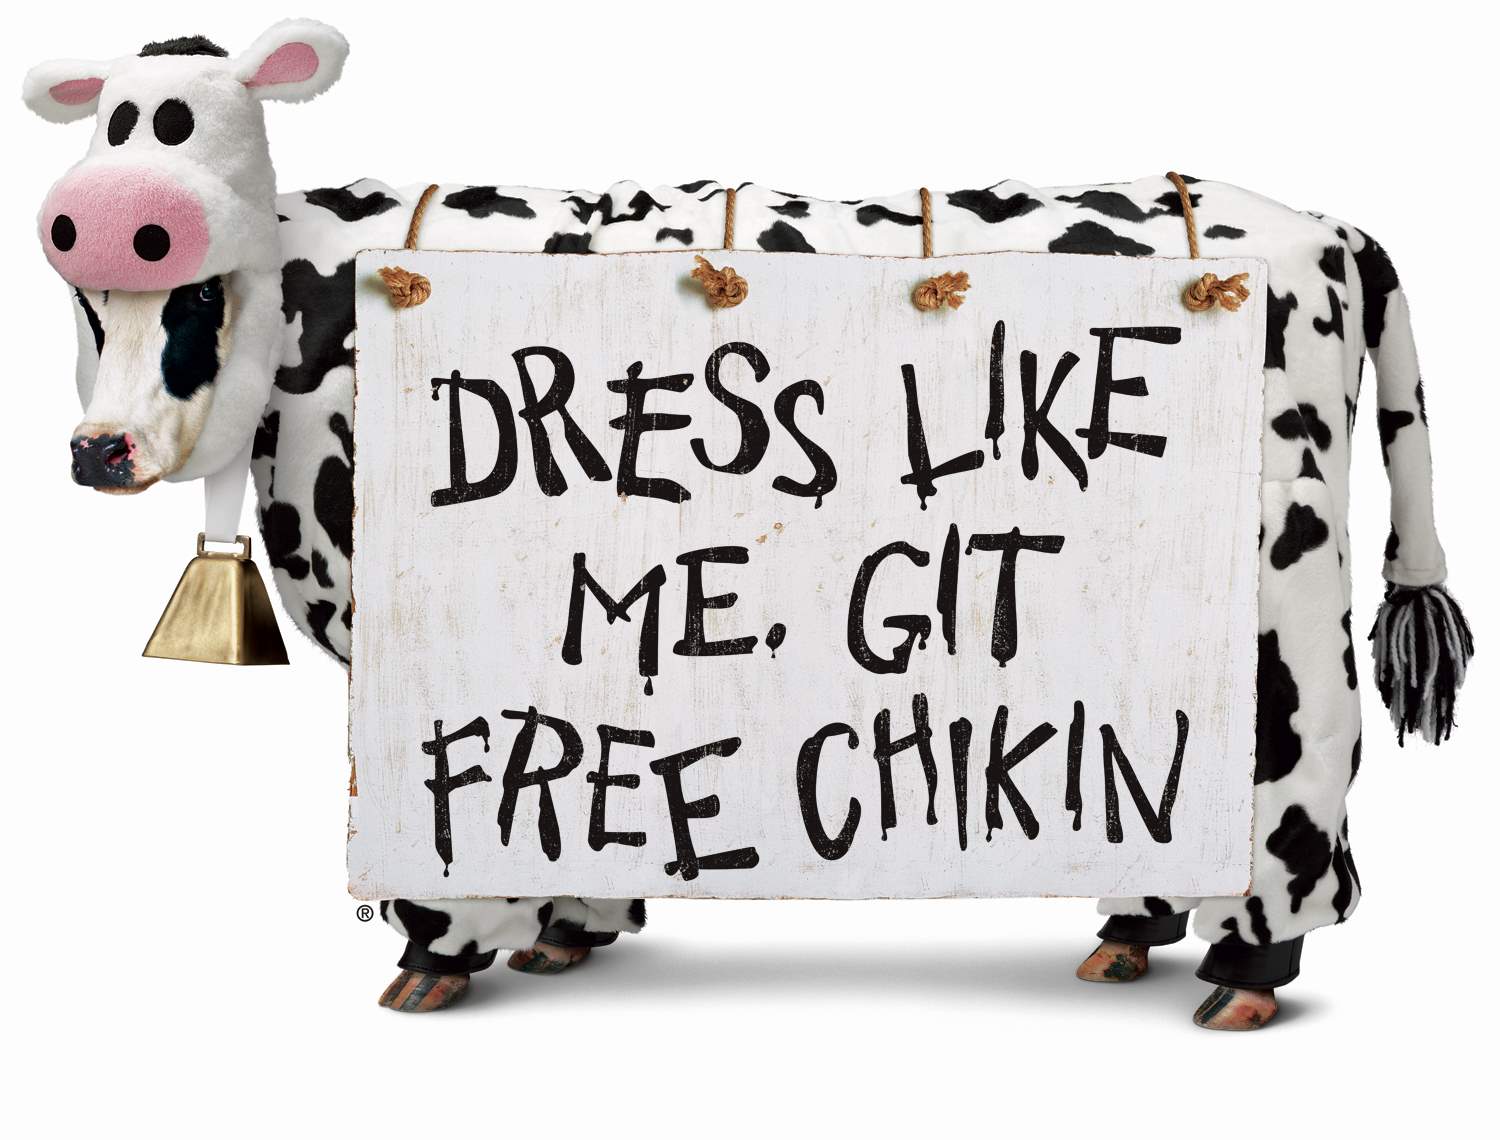 chick fil a cow sign